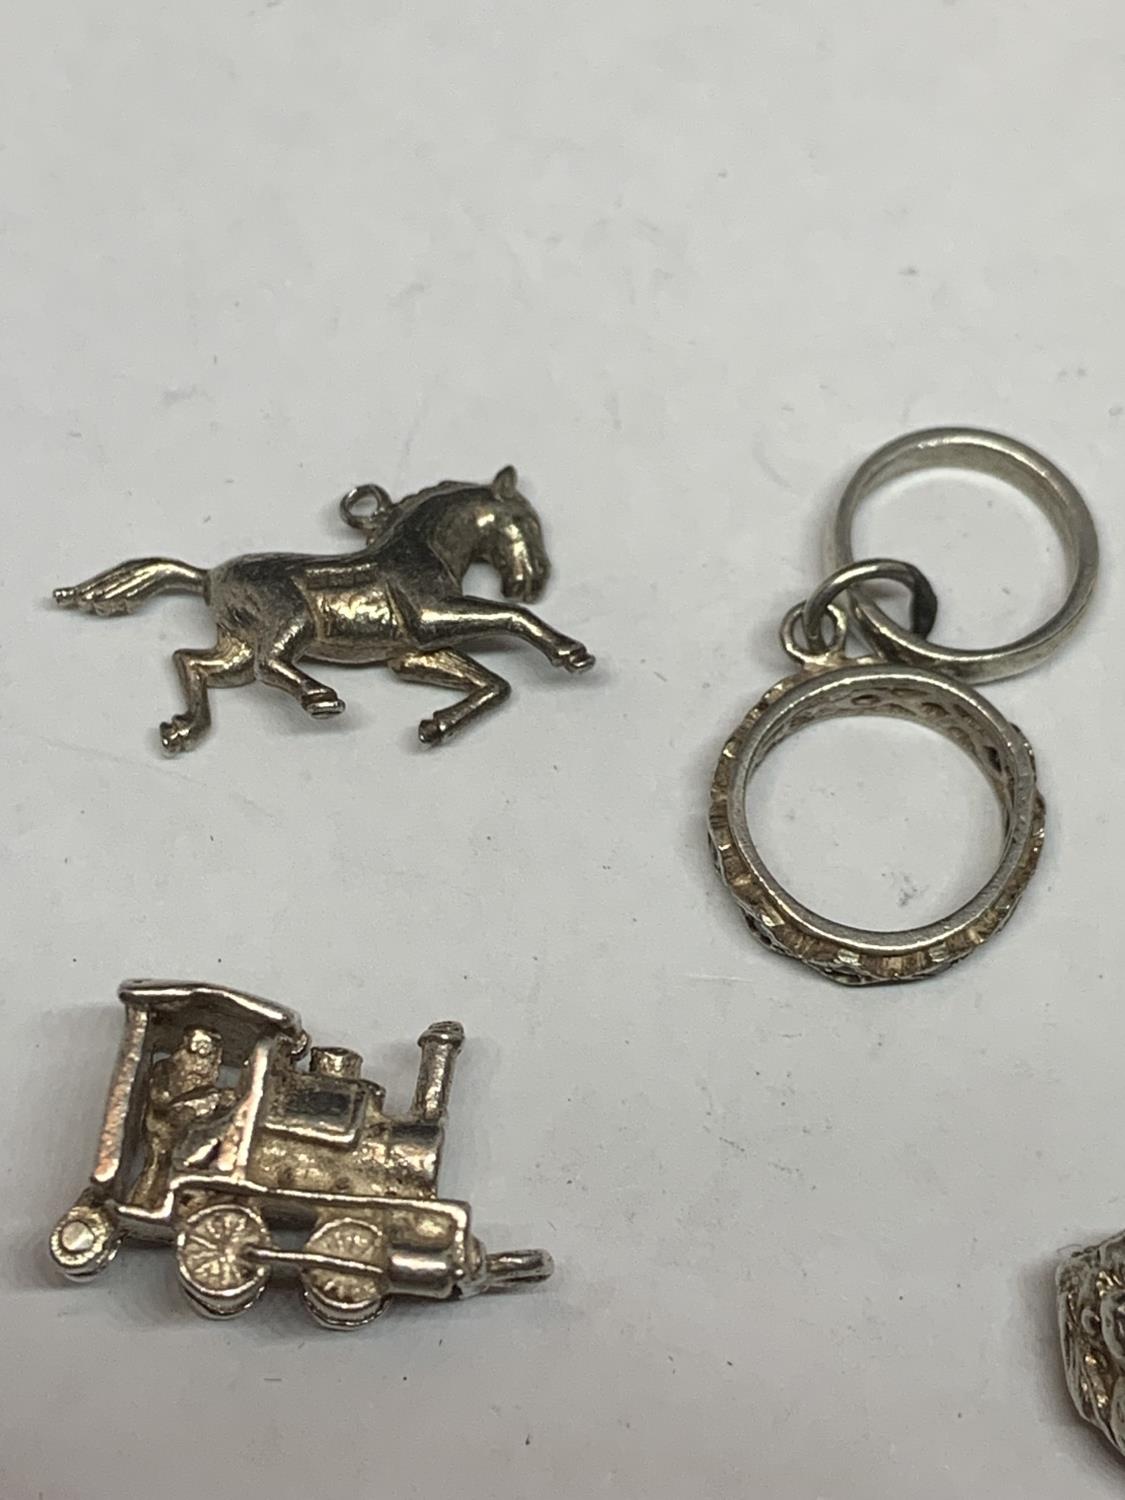 ELEVEN VARIOUS SILVER CHARMS TO INCLUDE HORSES, MOULIN ROUGE DANCER, DOG, TRAIN CHURCH ETC - Image 2 of 5